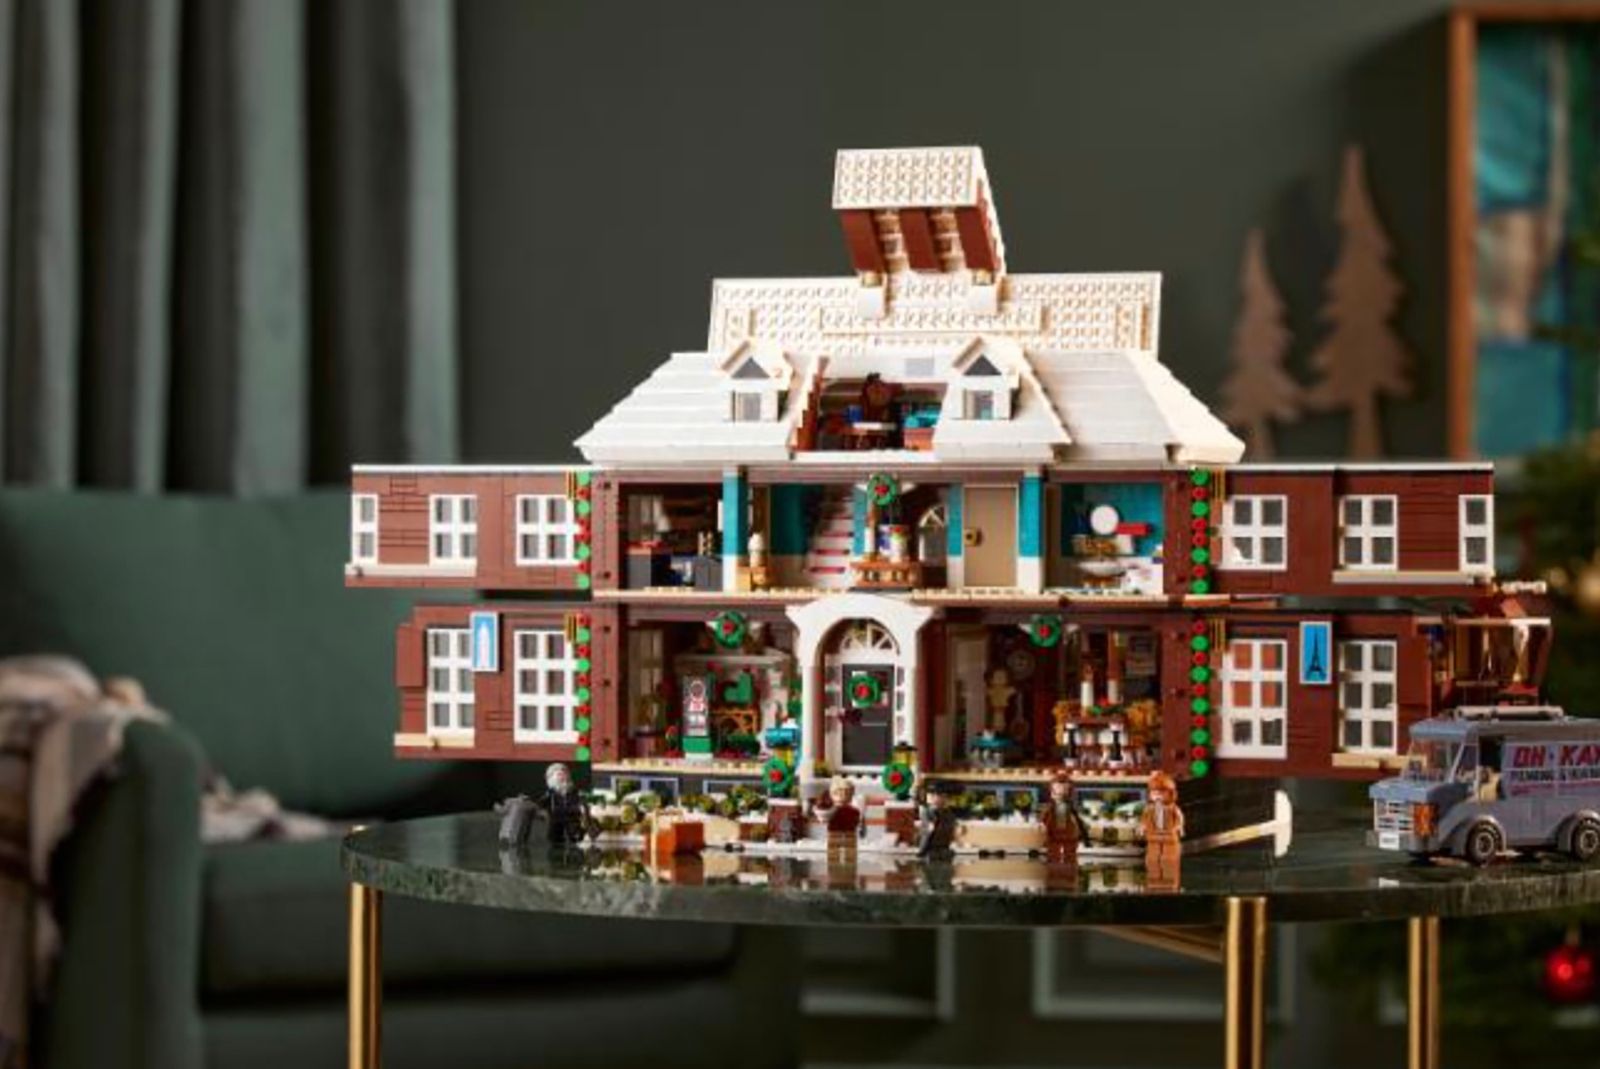 Lego recreates McCallister House from Home Alone with new 4,000 piece set photo 8